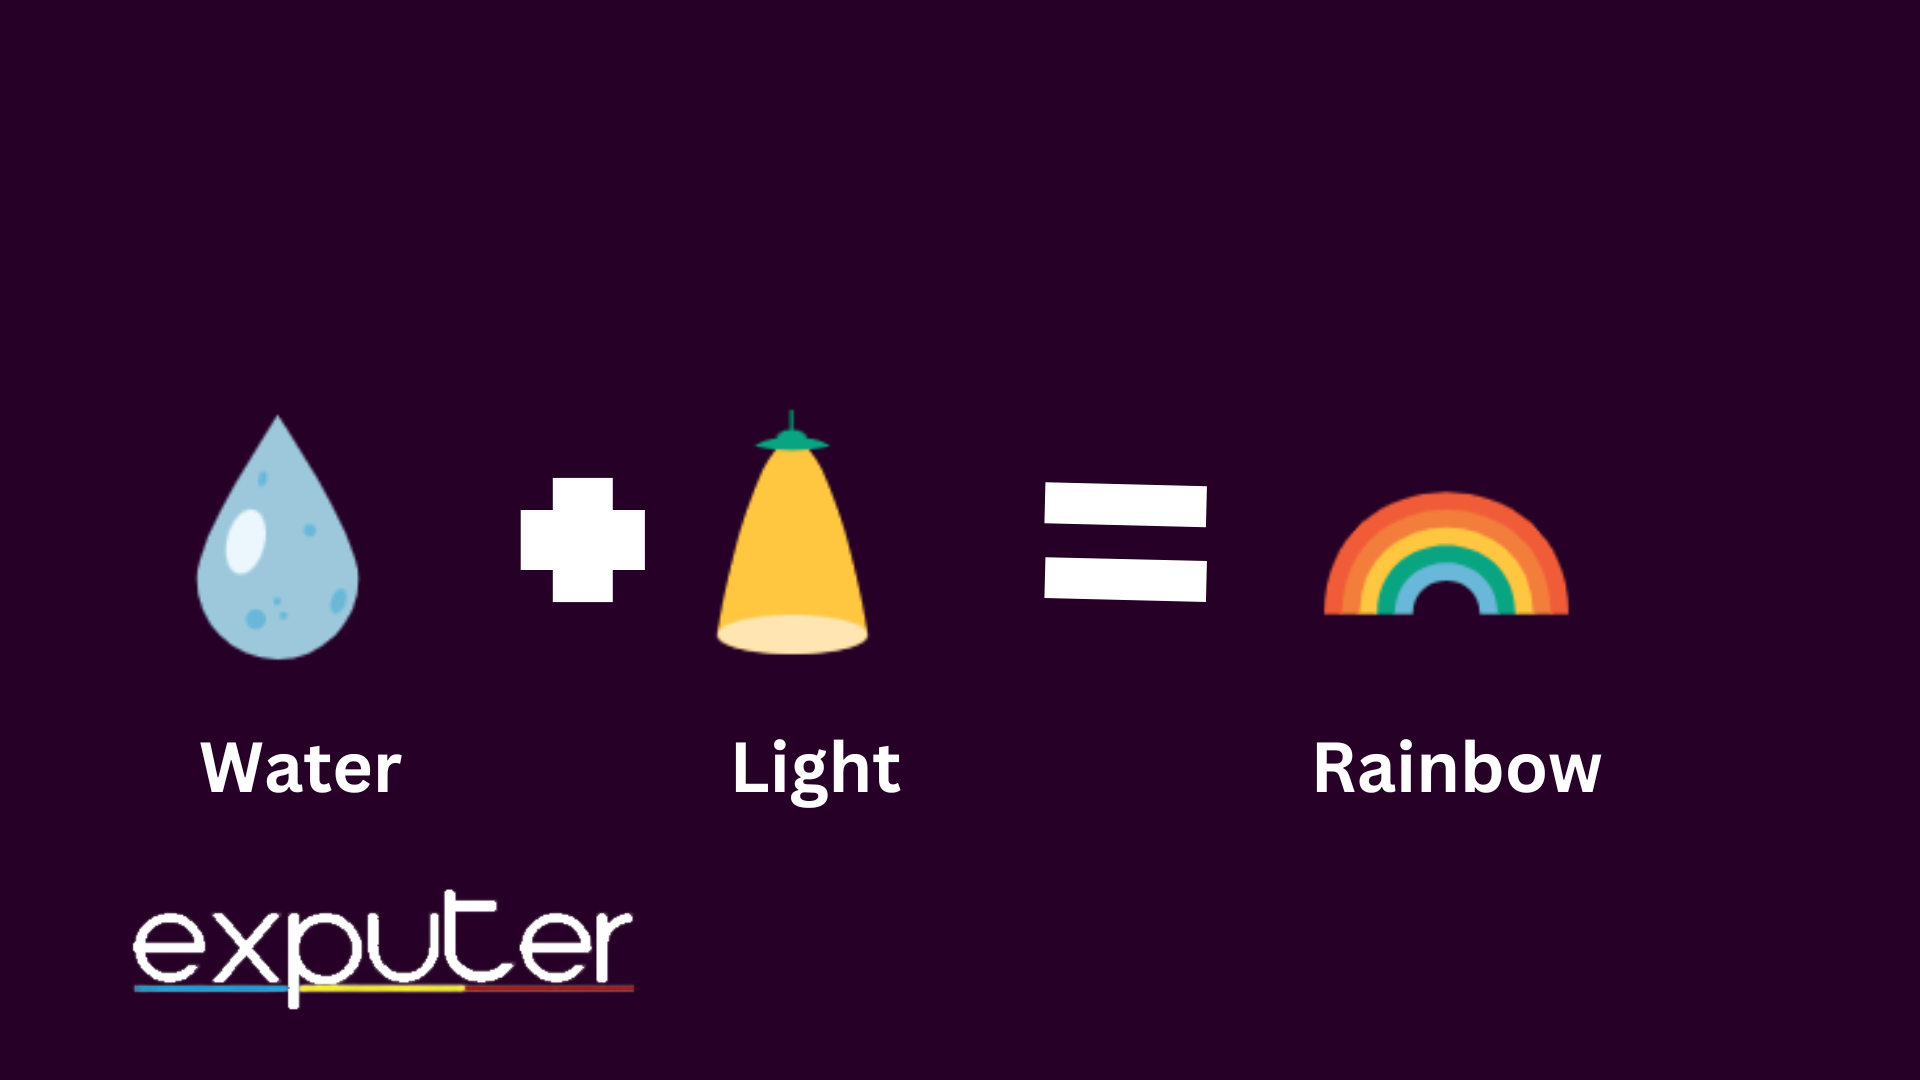 making rainbow from water and light